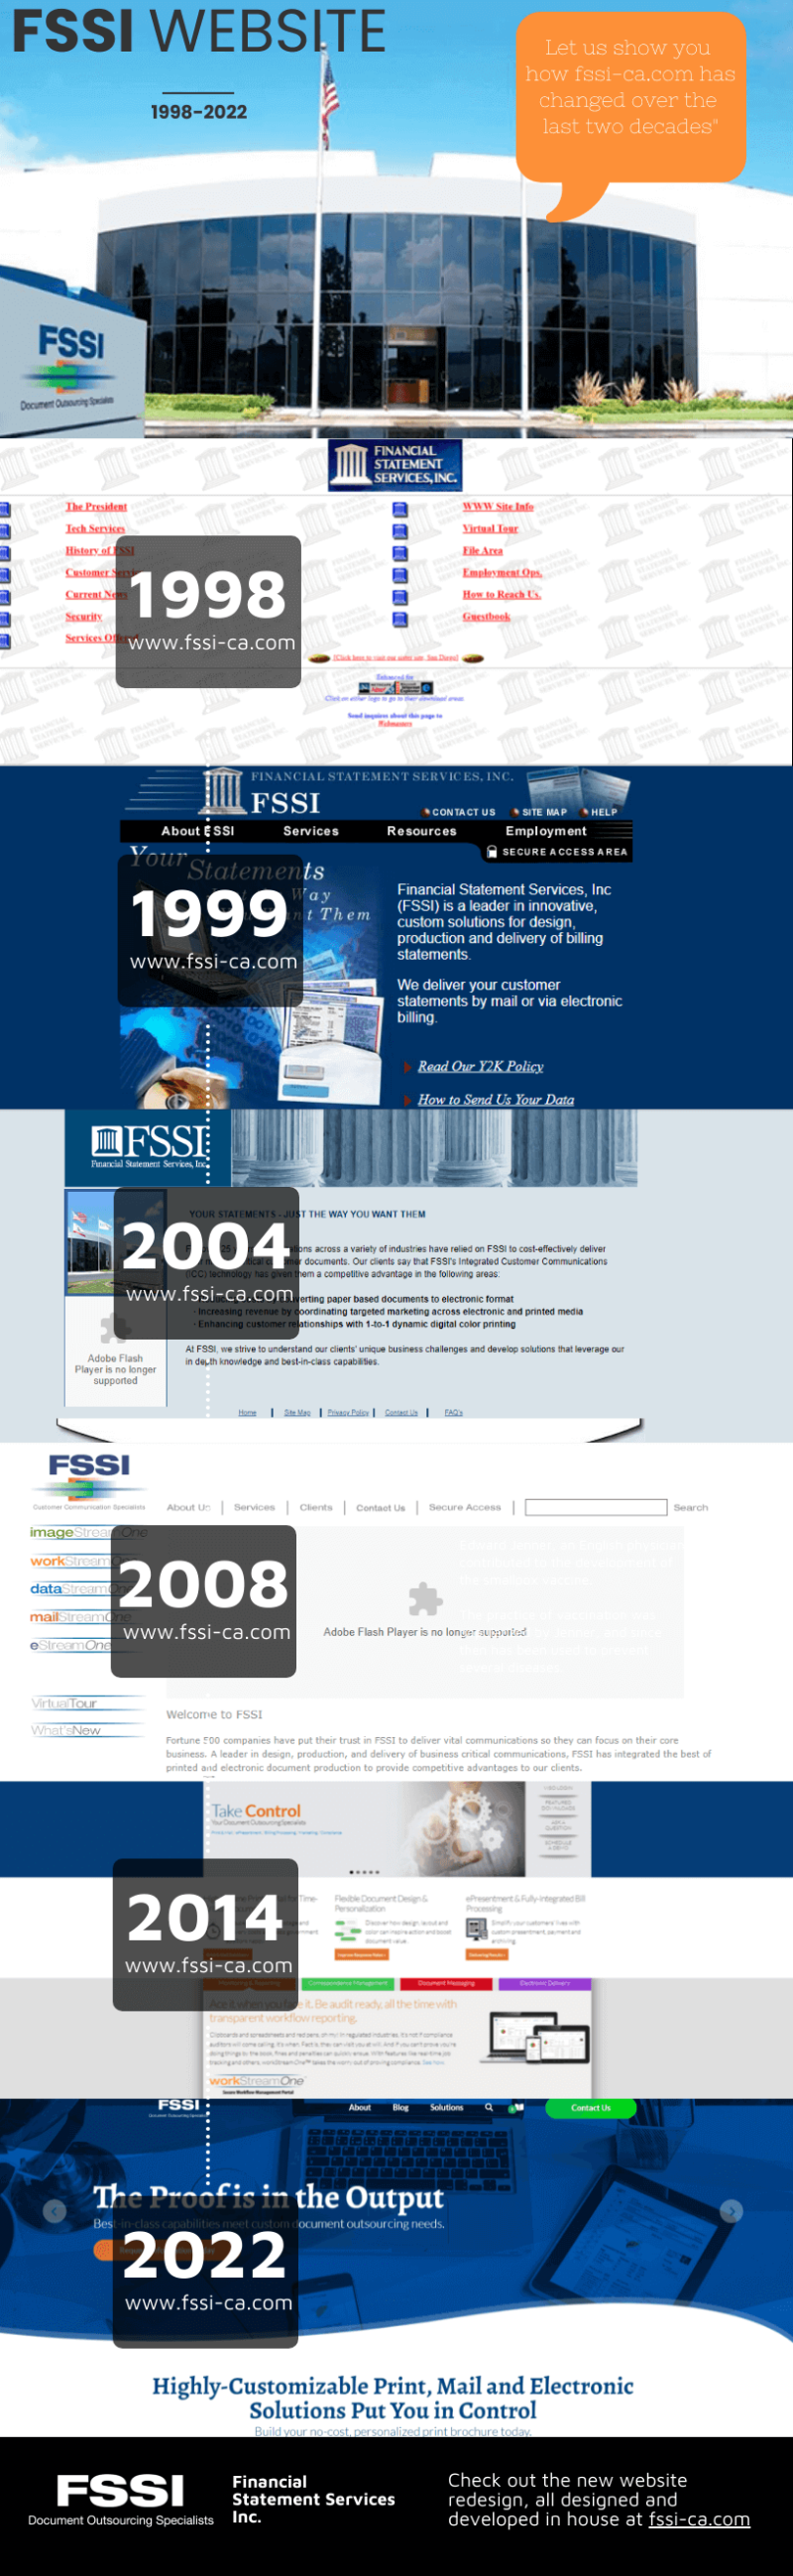 How the FSSI website looked from 1998 to 2022.